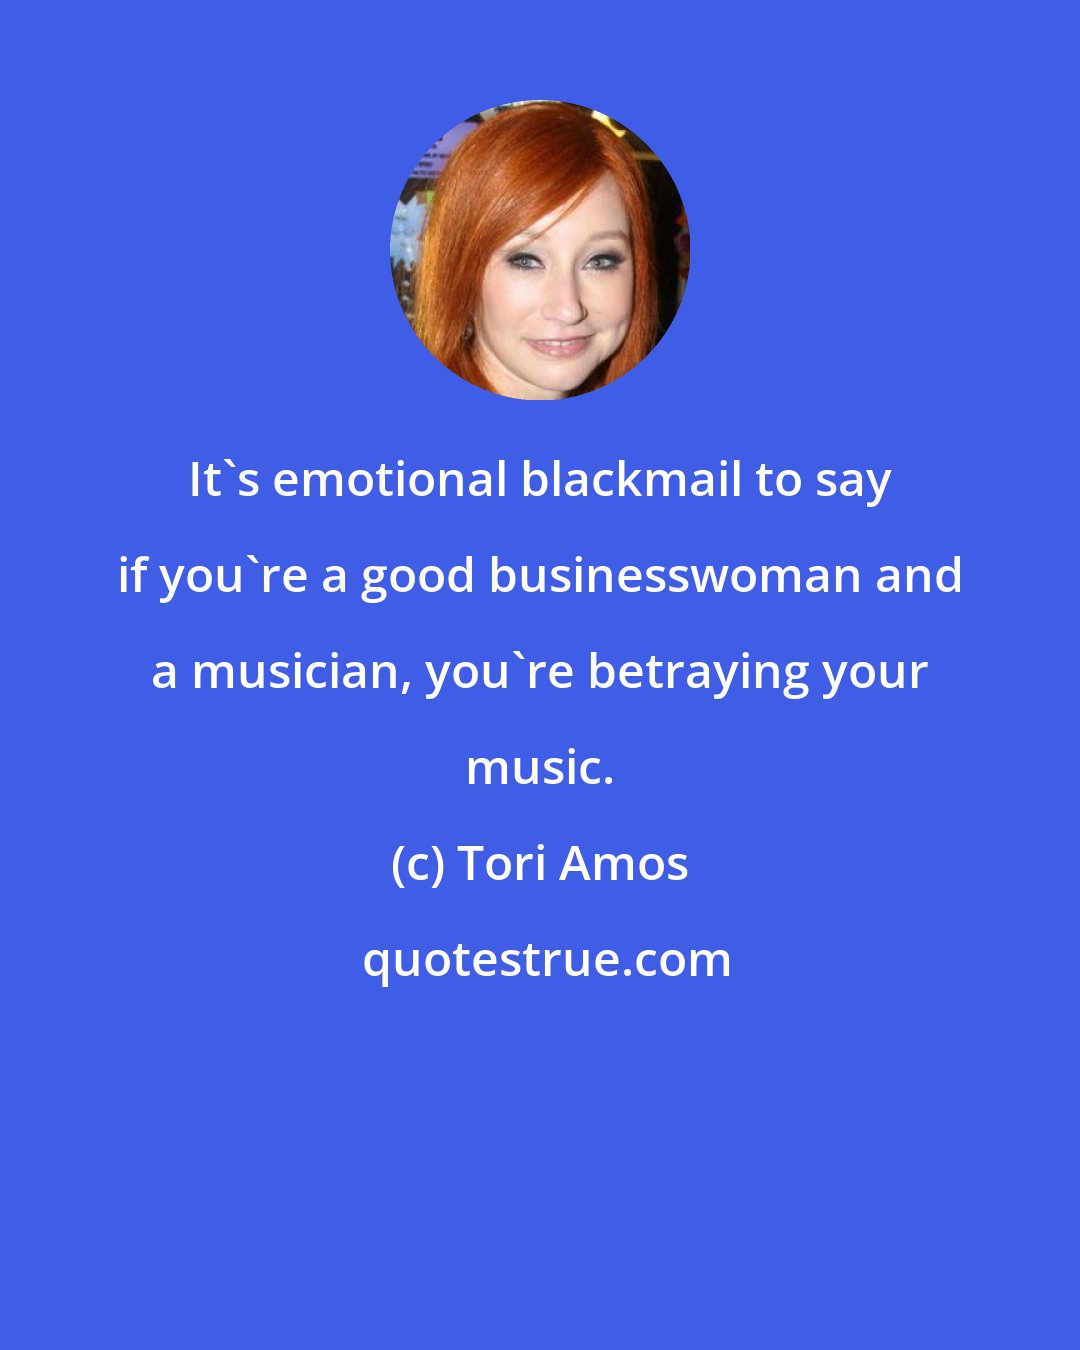 Tori Amos: It's emotional blackmail to say if you're a good businesswoman and a musician, you're betraying your music.